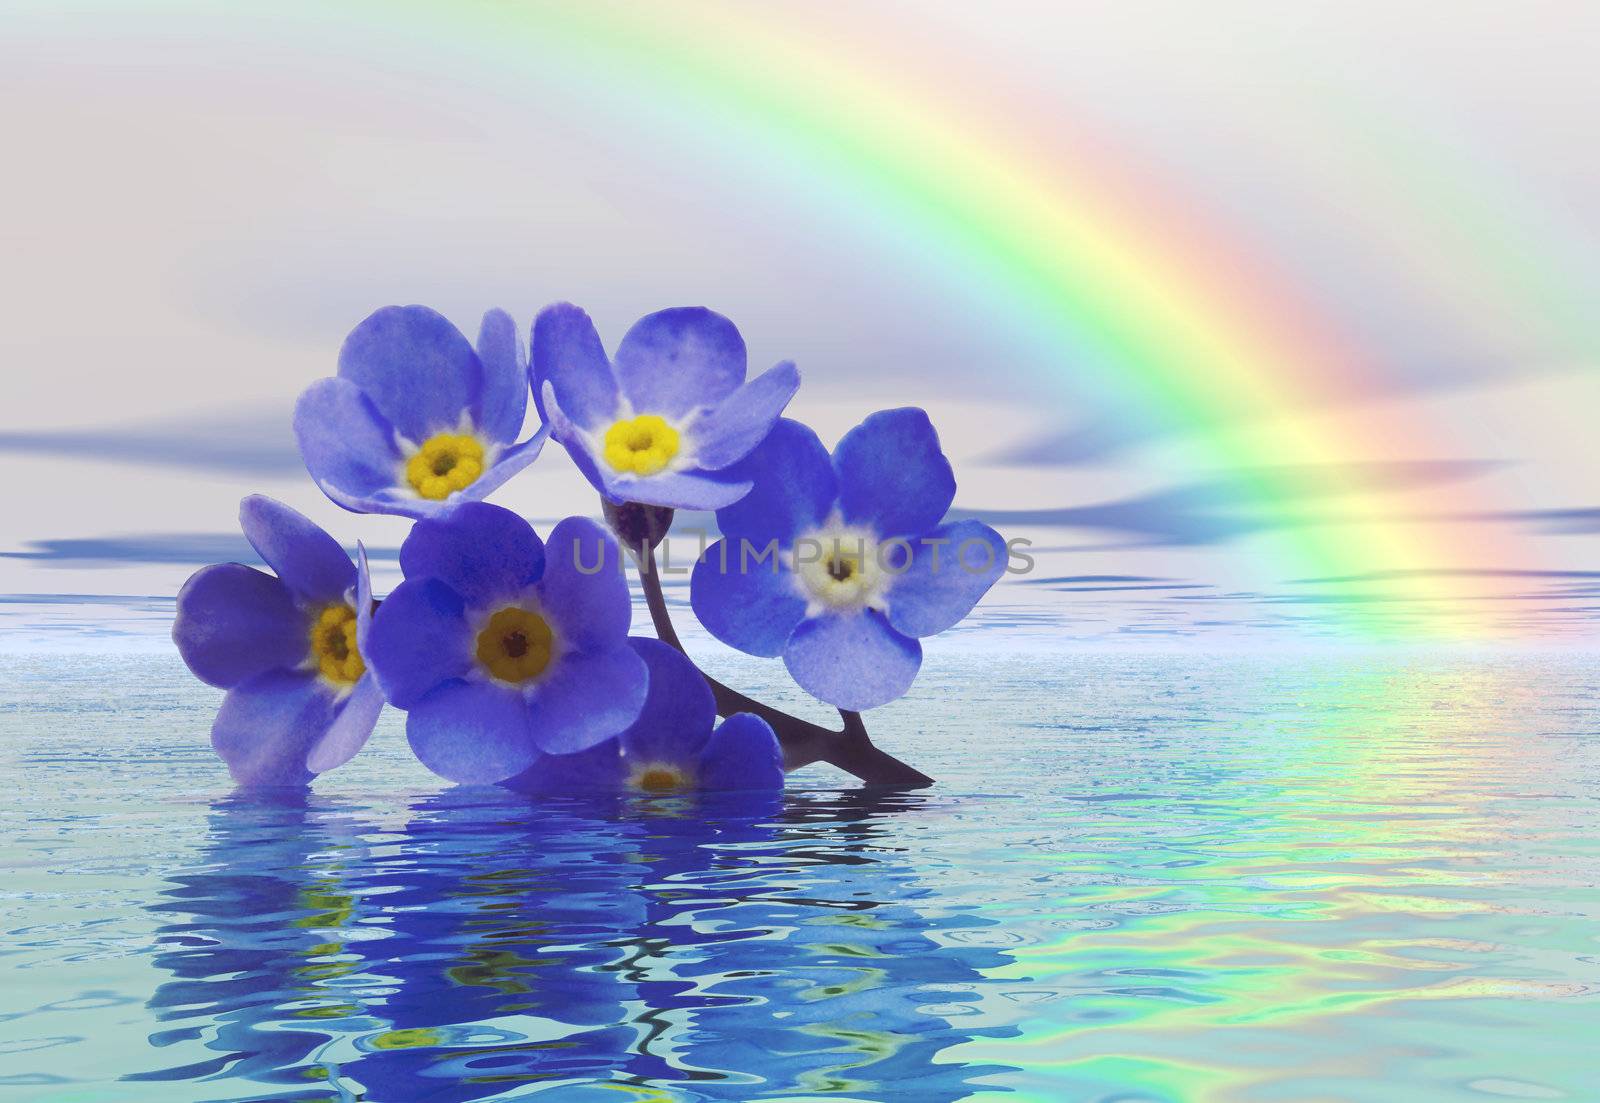 A discarded forget-me-not floats on the water with a rainbow in the background